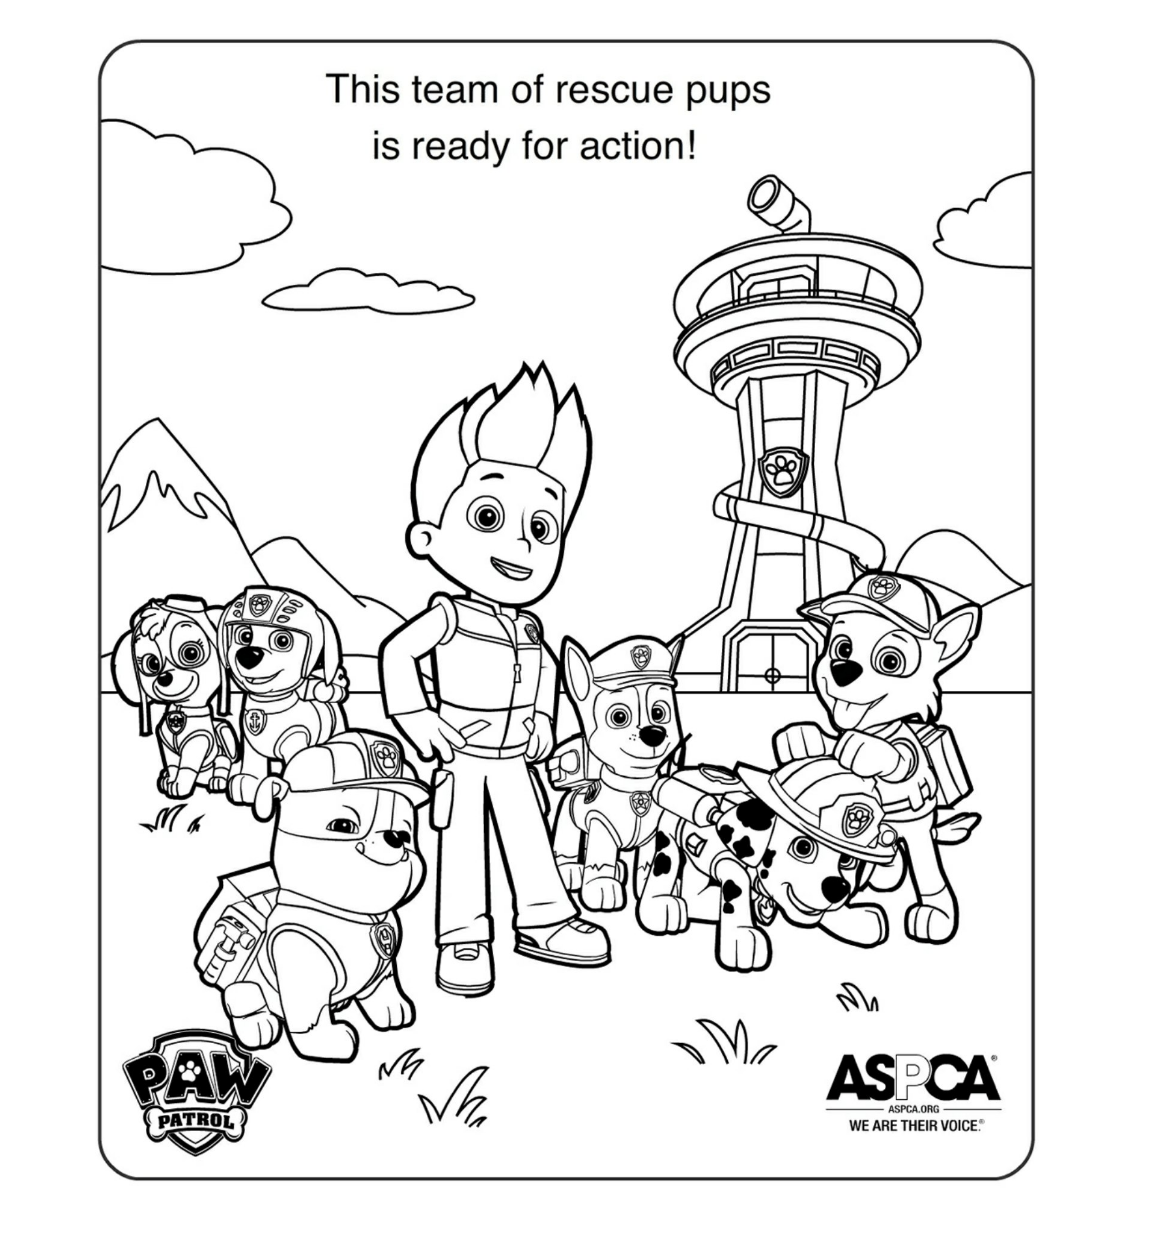 Free Paw Pages, Download Free Paw Patrol Coloring Pages png Free ClipArts on Clipart Library